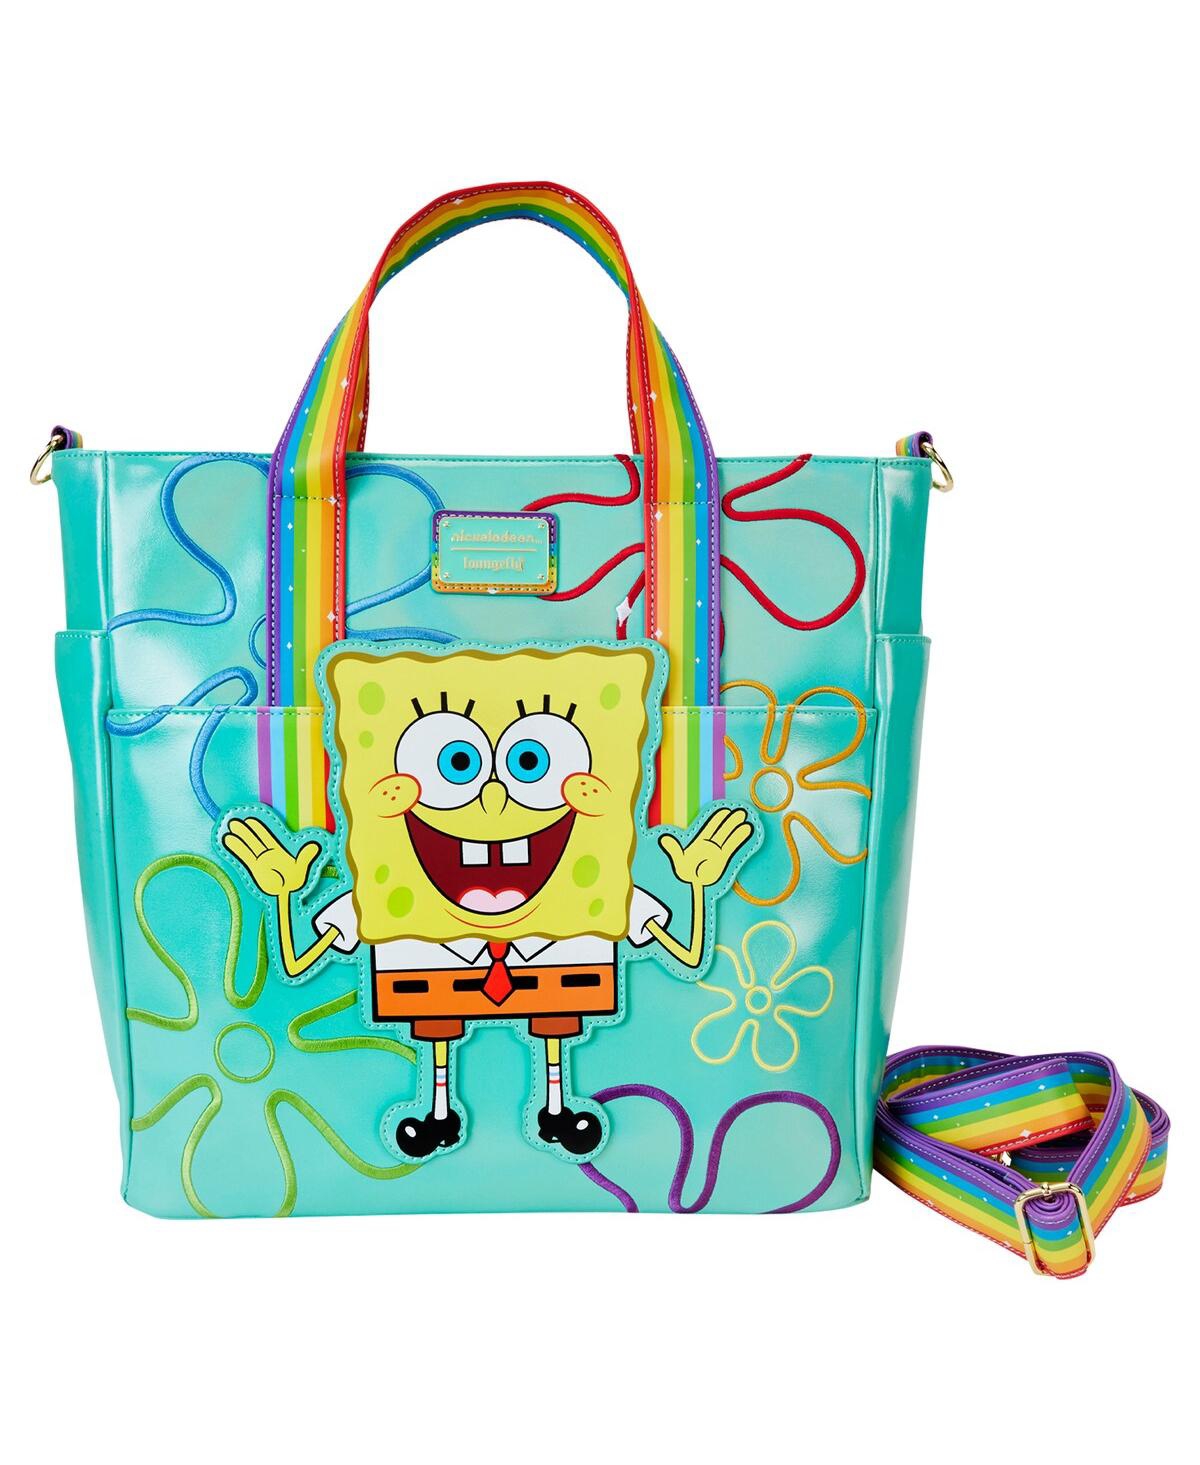 Loungefly Spongebob Square Pants 25th Anniversary Imagination Convertible Tote Bag In No Color